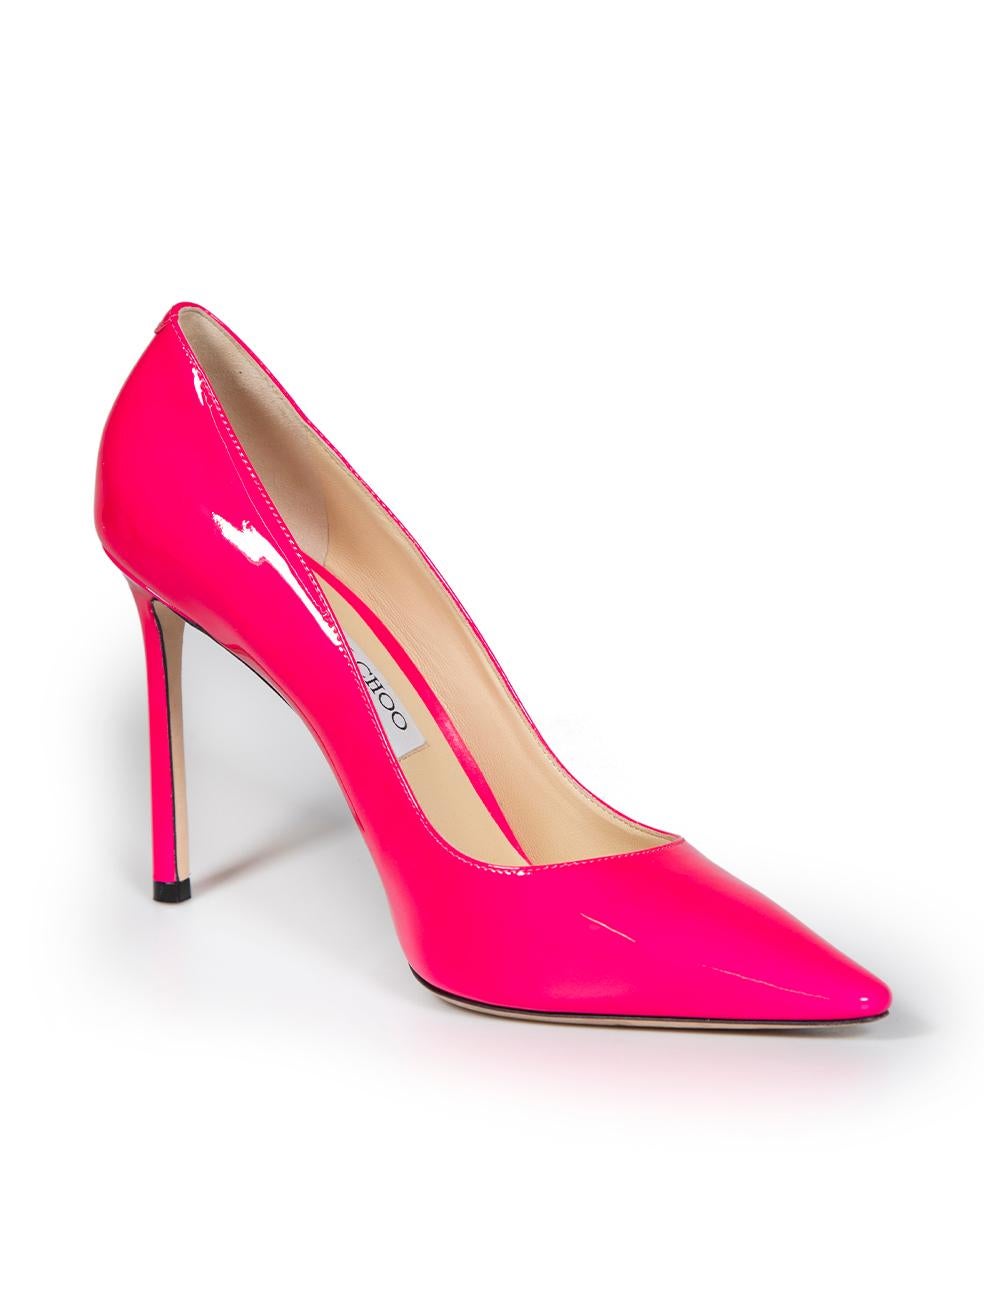 CONDITION is Verygood. Hardly any visible wear to shoes is evident on this used Jimmy Choo designer resale item.
 
 
 
 Details
 
 
 Hot pink
 
 Patent leather
 
 Pumps
 
 Point toe
 
 Slip on
 
 High heeled
 
 
 
 
 
 Made in Italy
 
 
 
